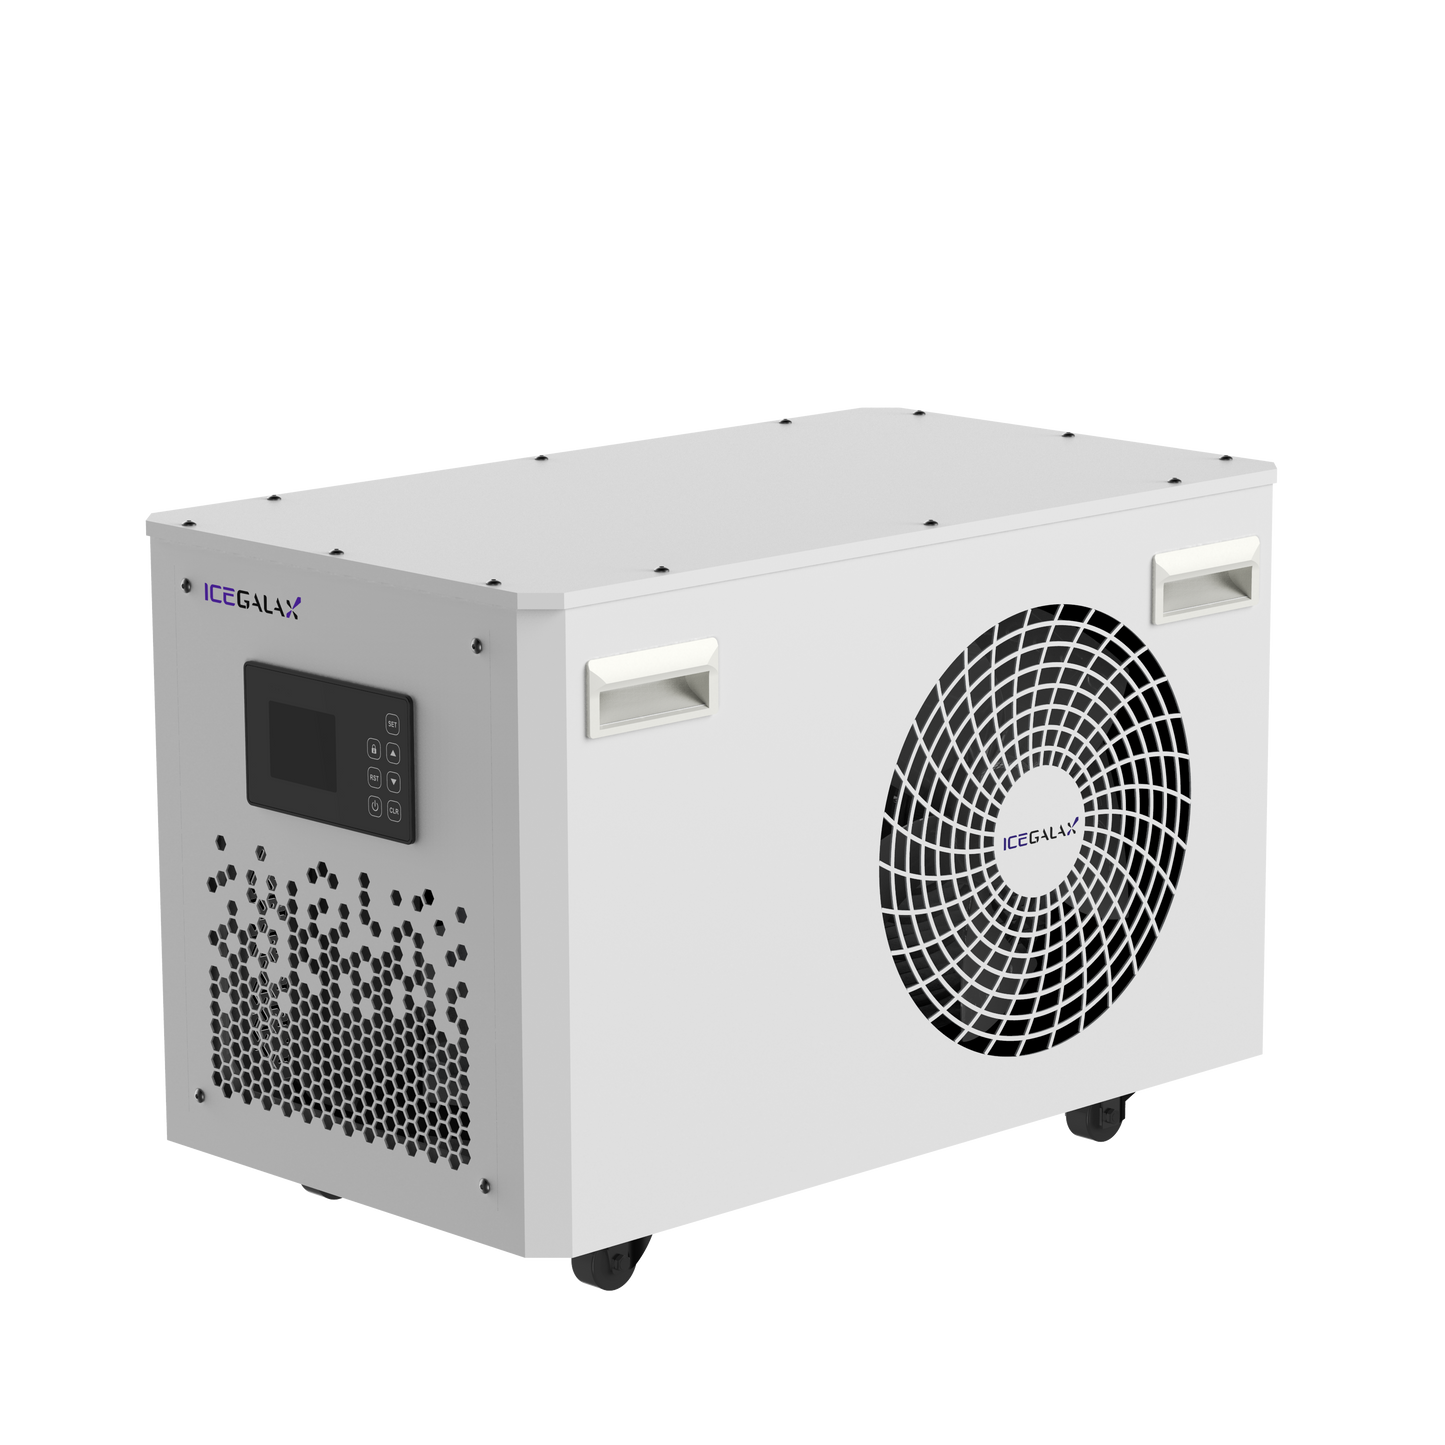 ICEGALAX Customized 1.5HP White Recirculating Cooled Chiller Cold Water Bath Cold Plunge Chiller